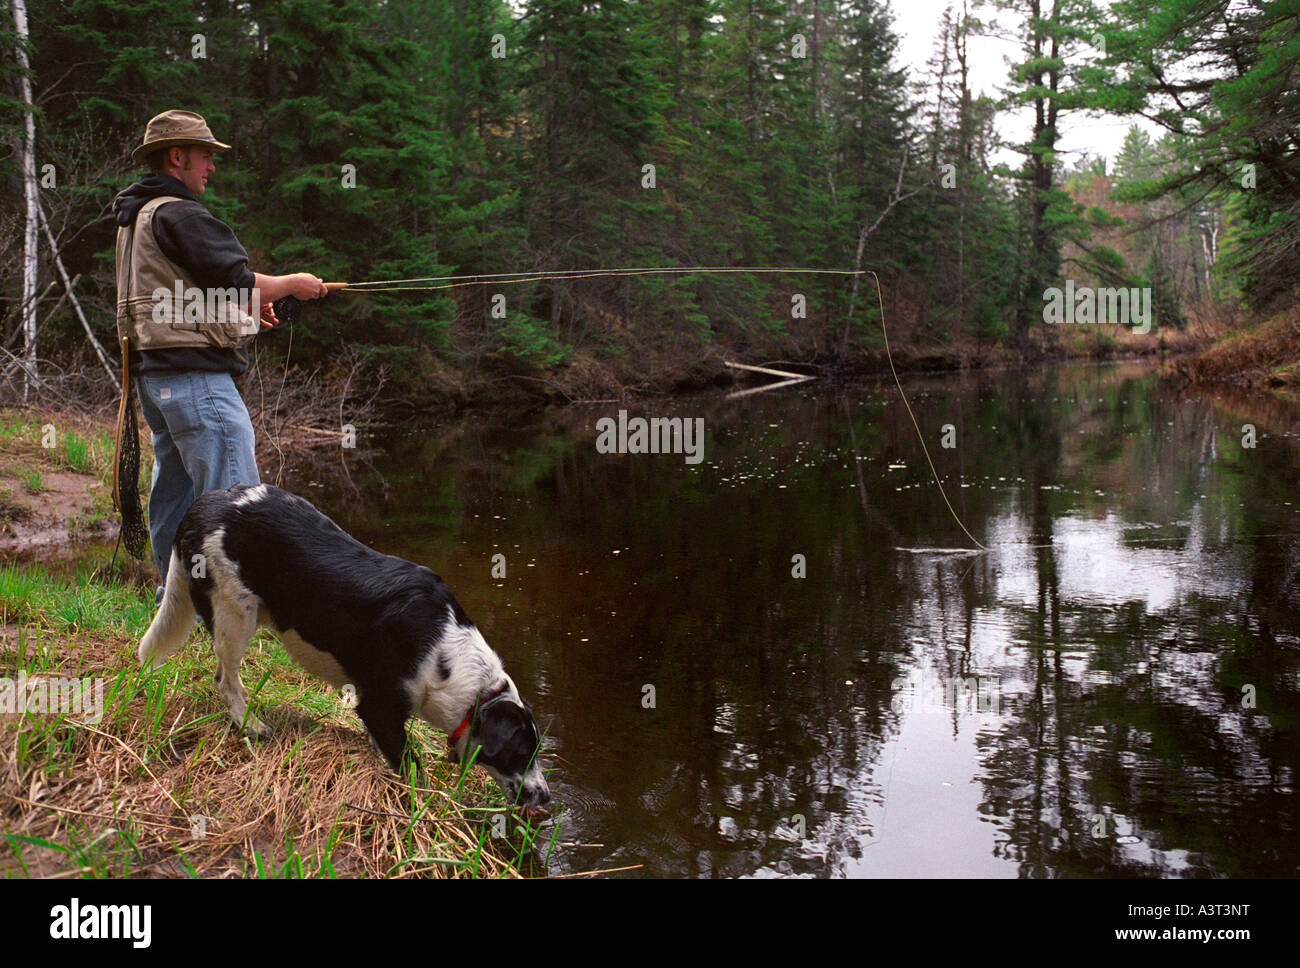 A MAN FLY FISHES WITH HIS DOG ON THE EAST BRANCH OF THE ESCANABA RIVER NEAR GWINN MICHIGAN Stock Photo